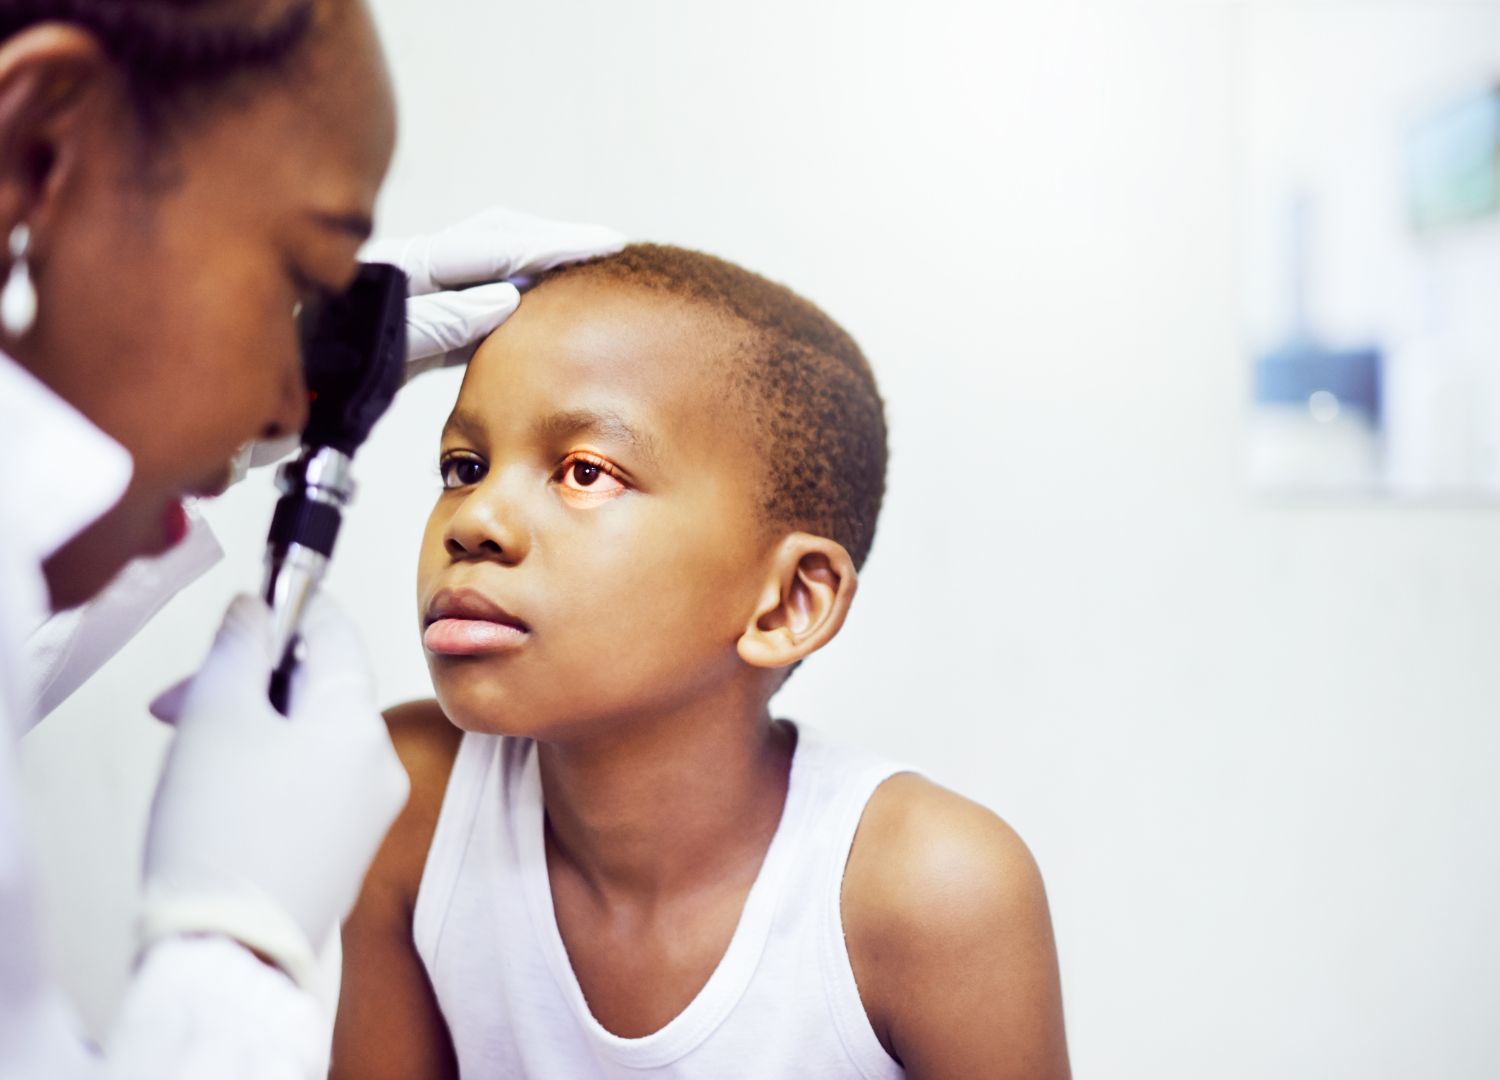 " The eyes don't lie: Catching health  issues early with routine eye checkups  (Pidgin)"